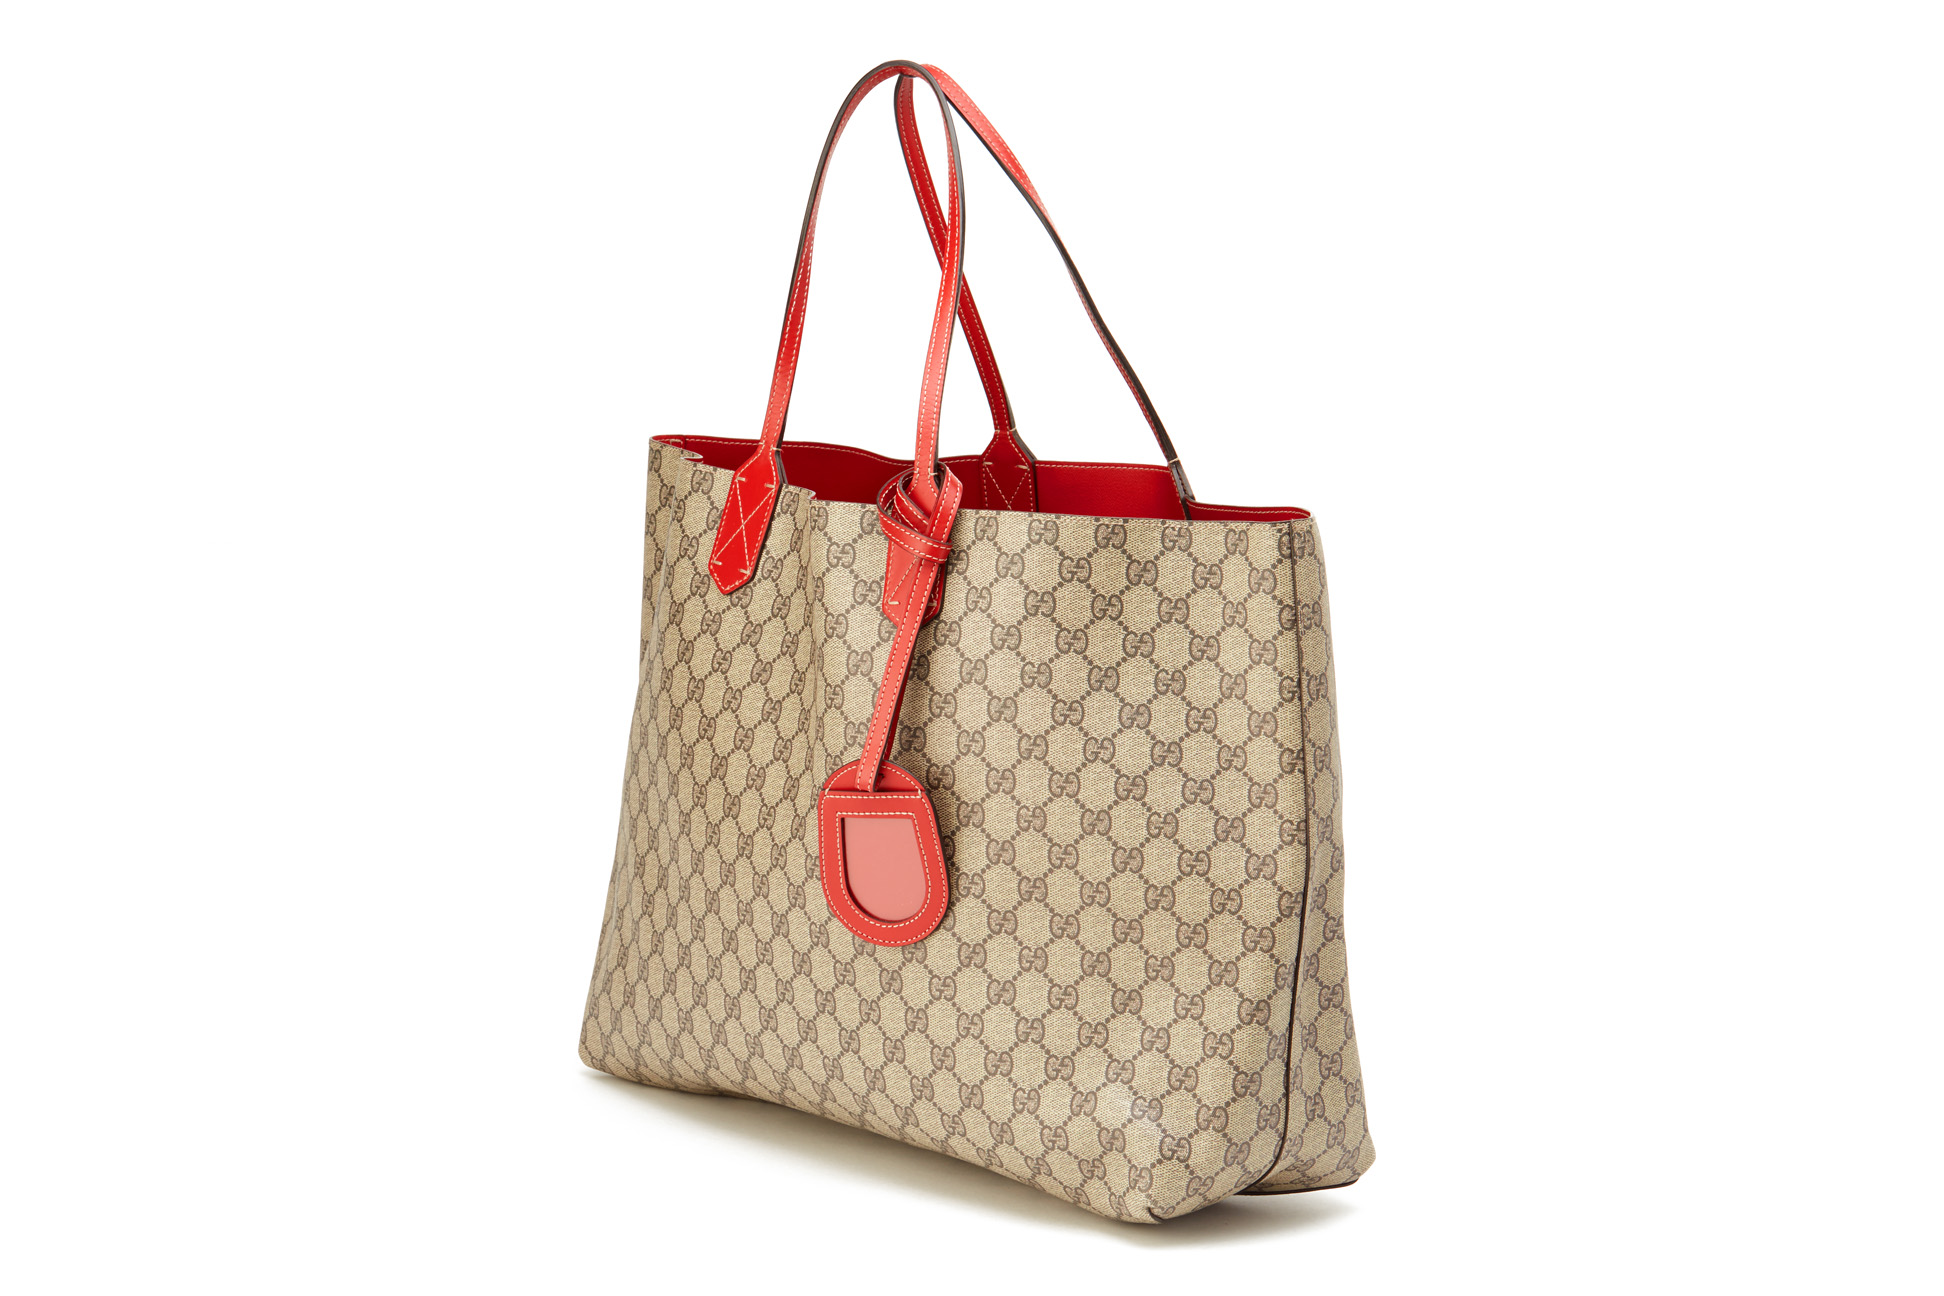 A GUCCI MONOGRAM GG REVERSIBLE LEATHER TOTE BAG - Image 2 of 6